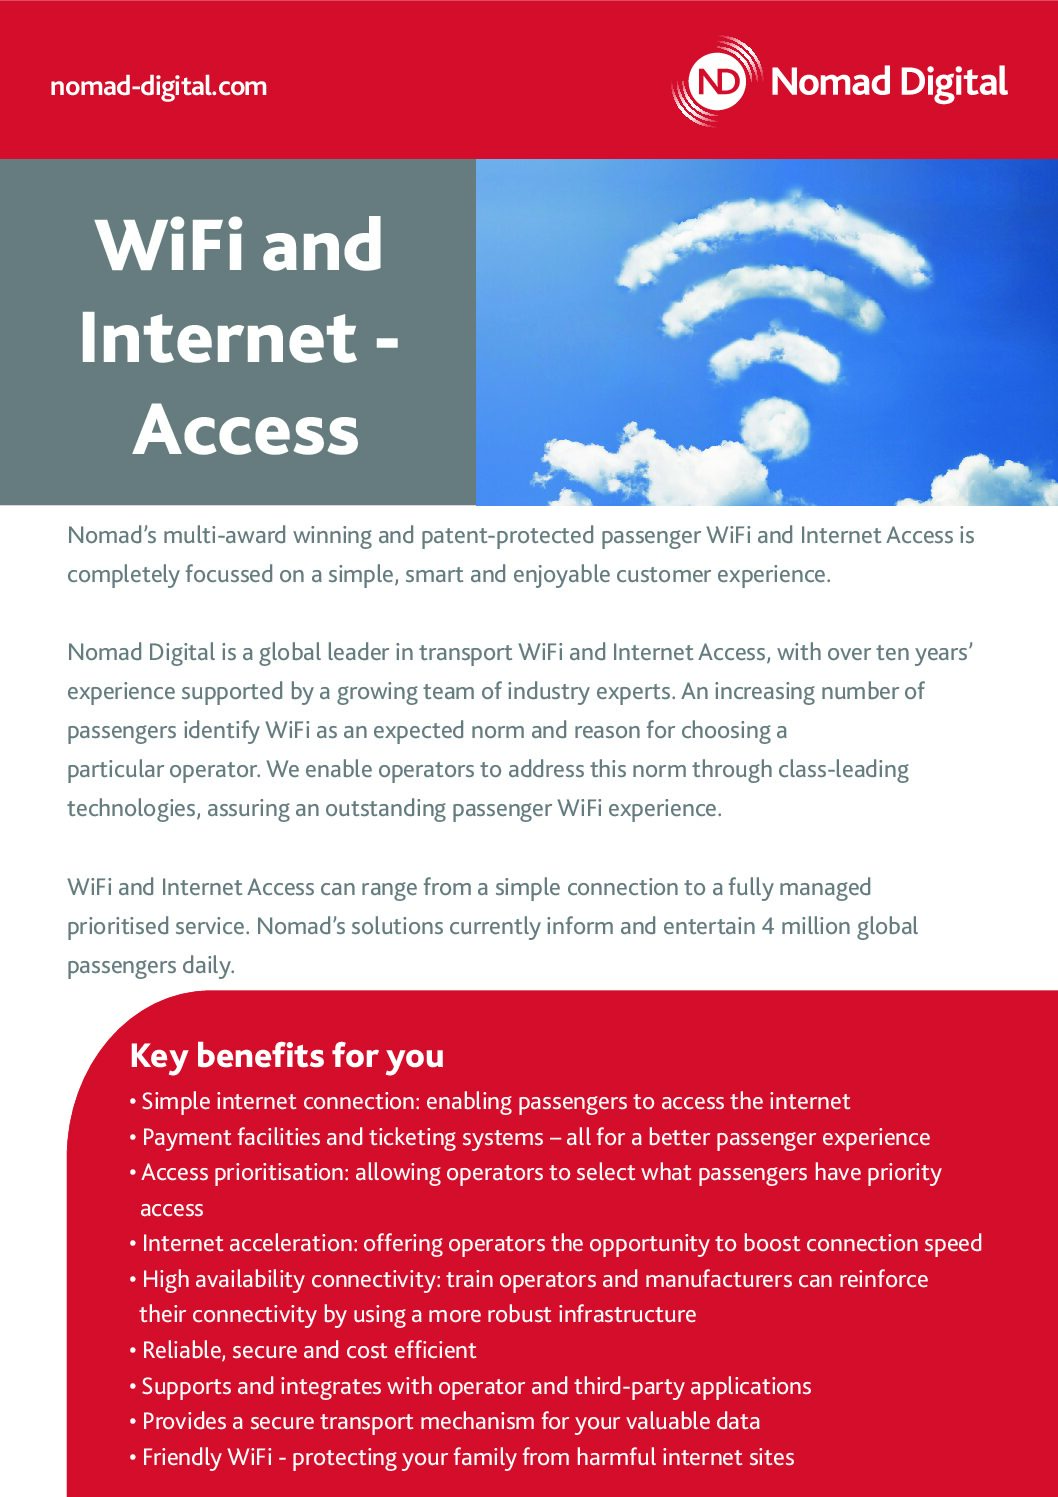 WiFi and Trackside Networks